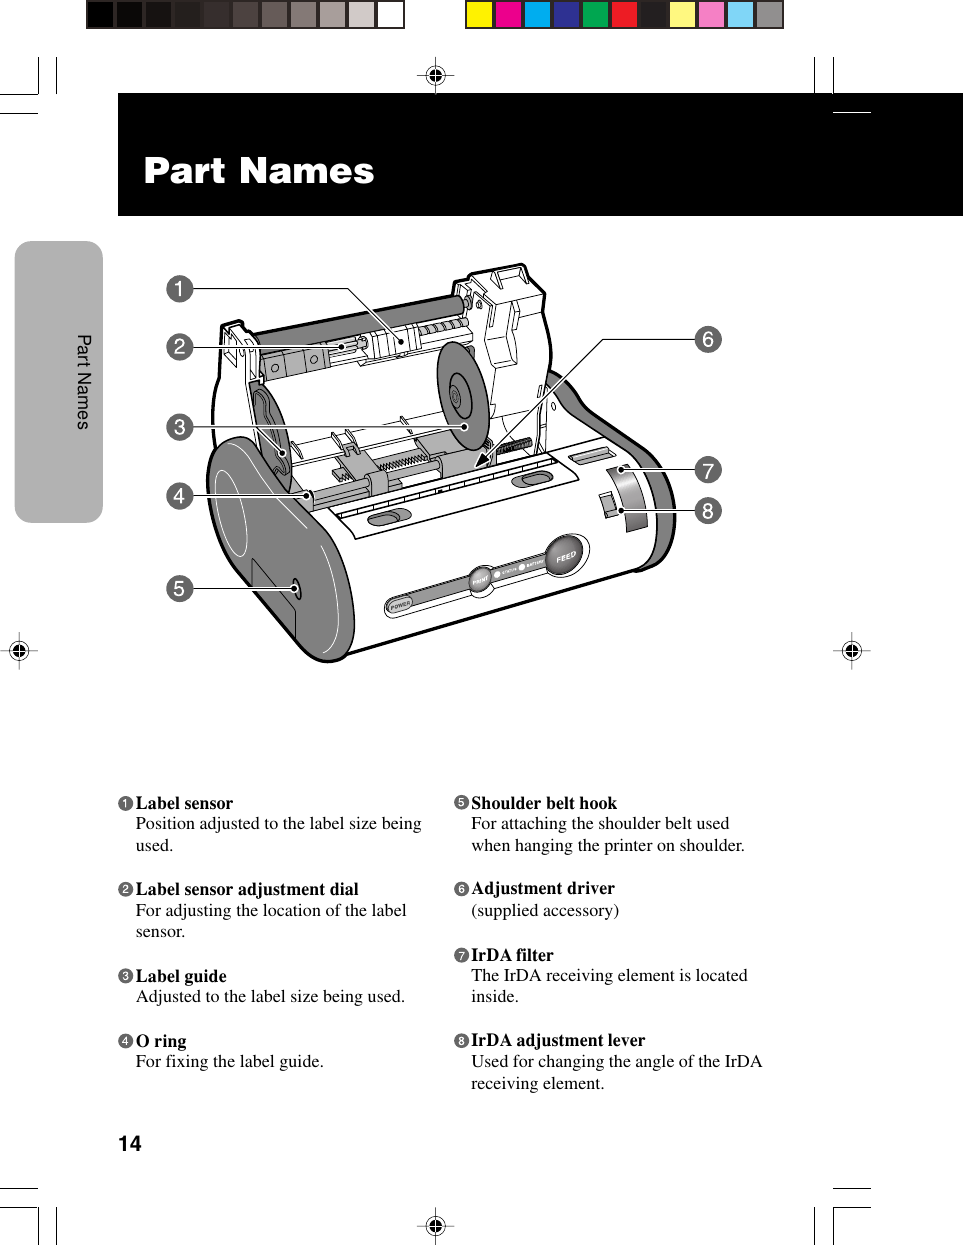 14Part NamesPart NamesLabel sensorPosition adjusted to the label size beingused.Label sensor adjustment dialFor adjusting the location of the labelsensor.Label guideAdjusted to the label size being used.O ringFor fixing the label guide.Shoulder belt hookFor attaching the shoulder belt usedwhen hanging the printer on shoulder.Adjustment driver(supplied accessory)IrDA filterThe IrDA receiving element is locatedinside.IrDA adjustment leverUsed for changing the angle of the IrDAreceiving element.